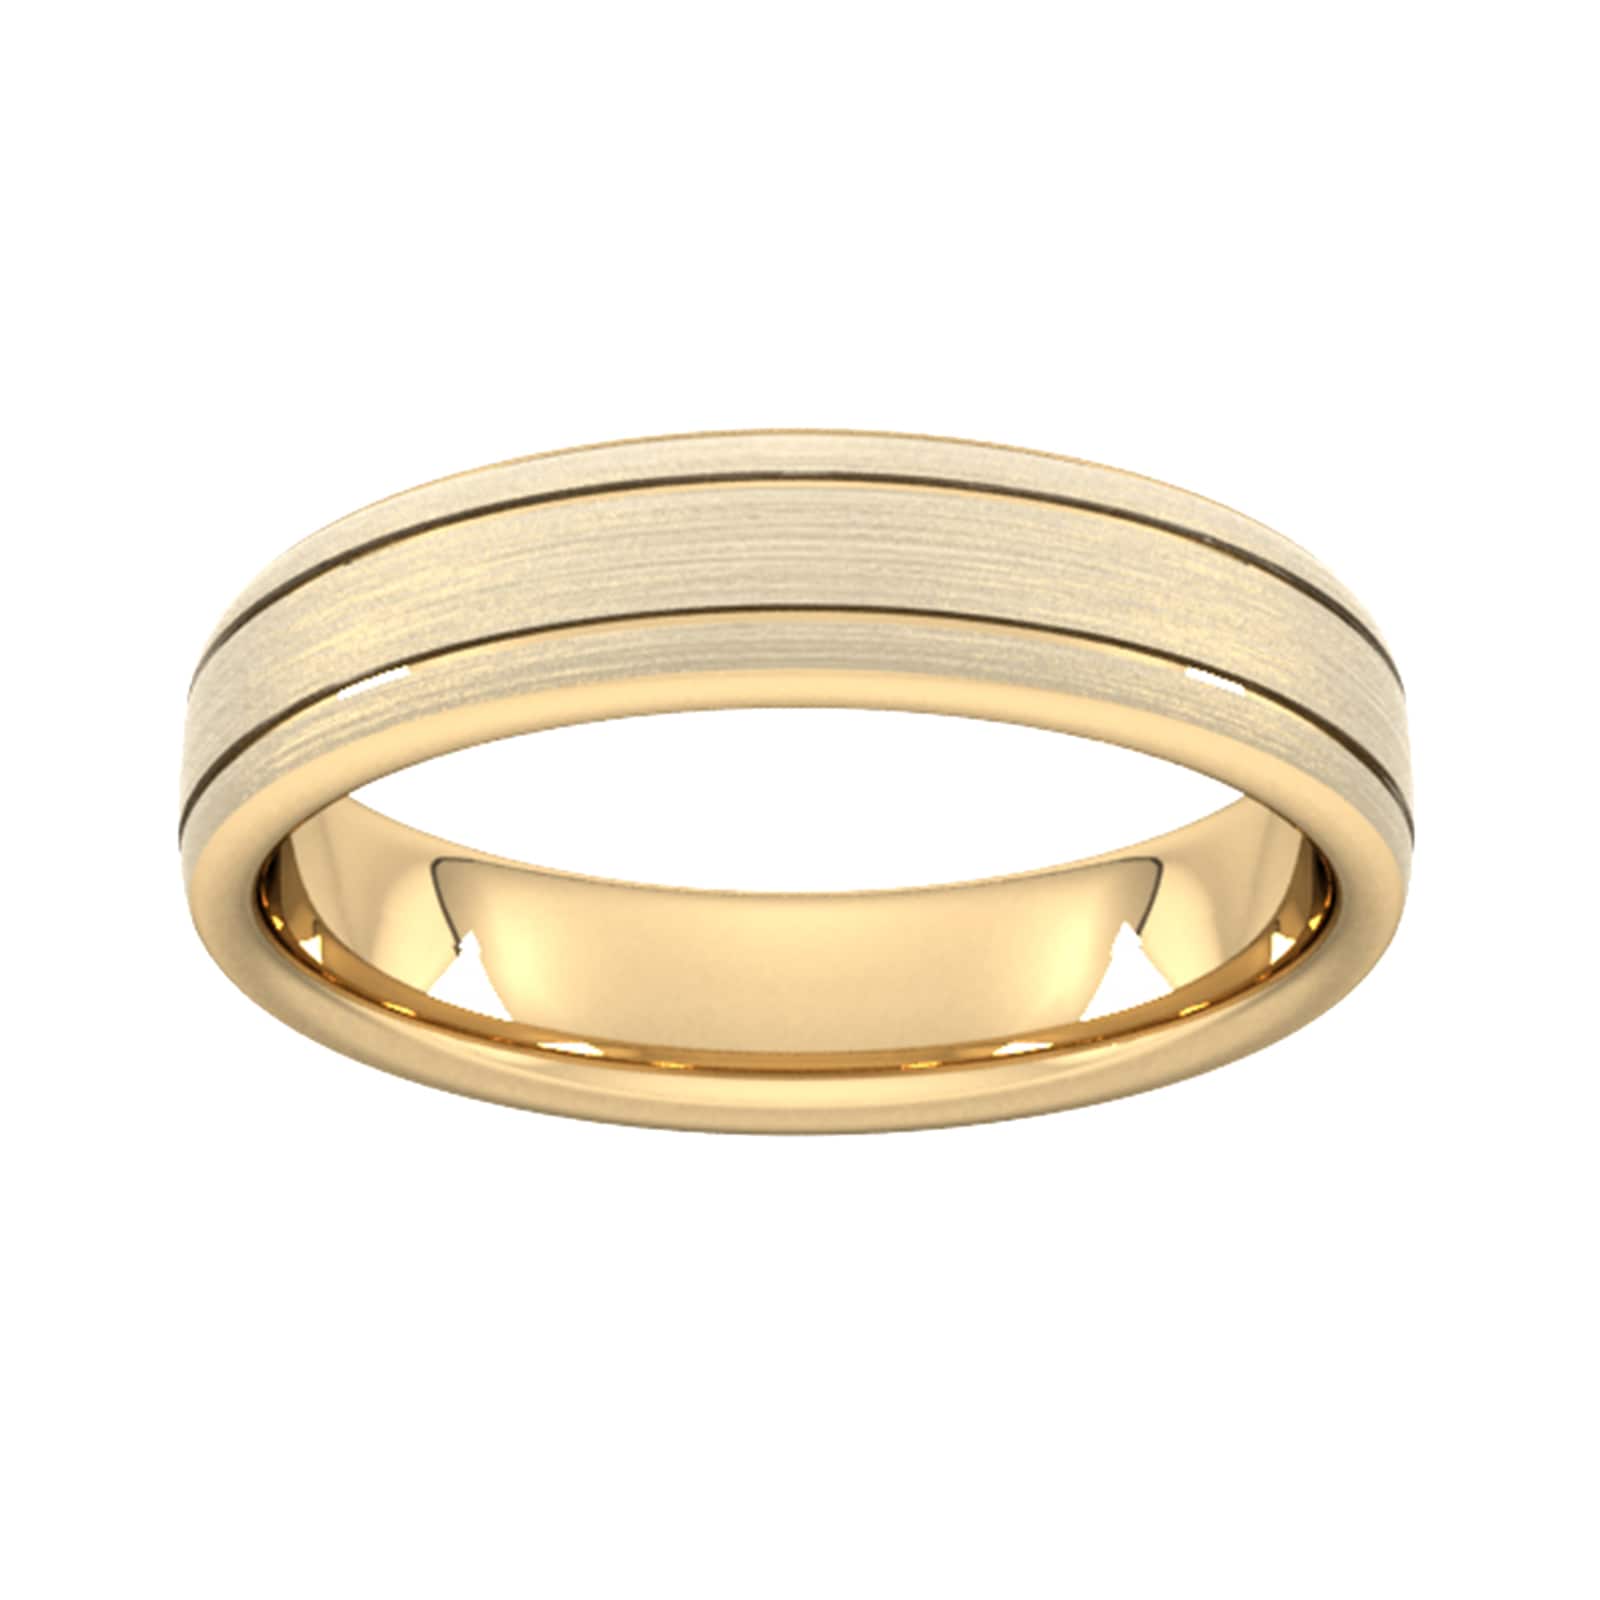 5mm Slight Court Standard Matt Finish With Double Grooves Wedding Ring In 9 Carat Yellow Gold - Ring Size V